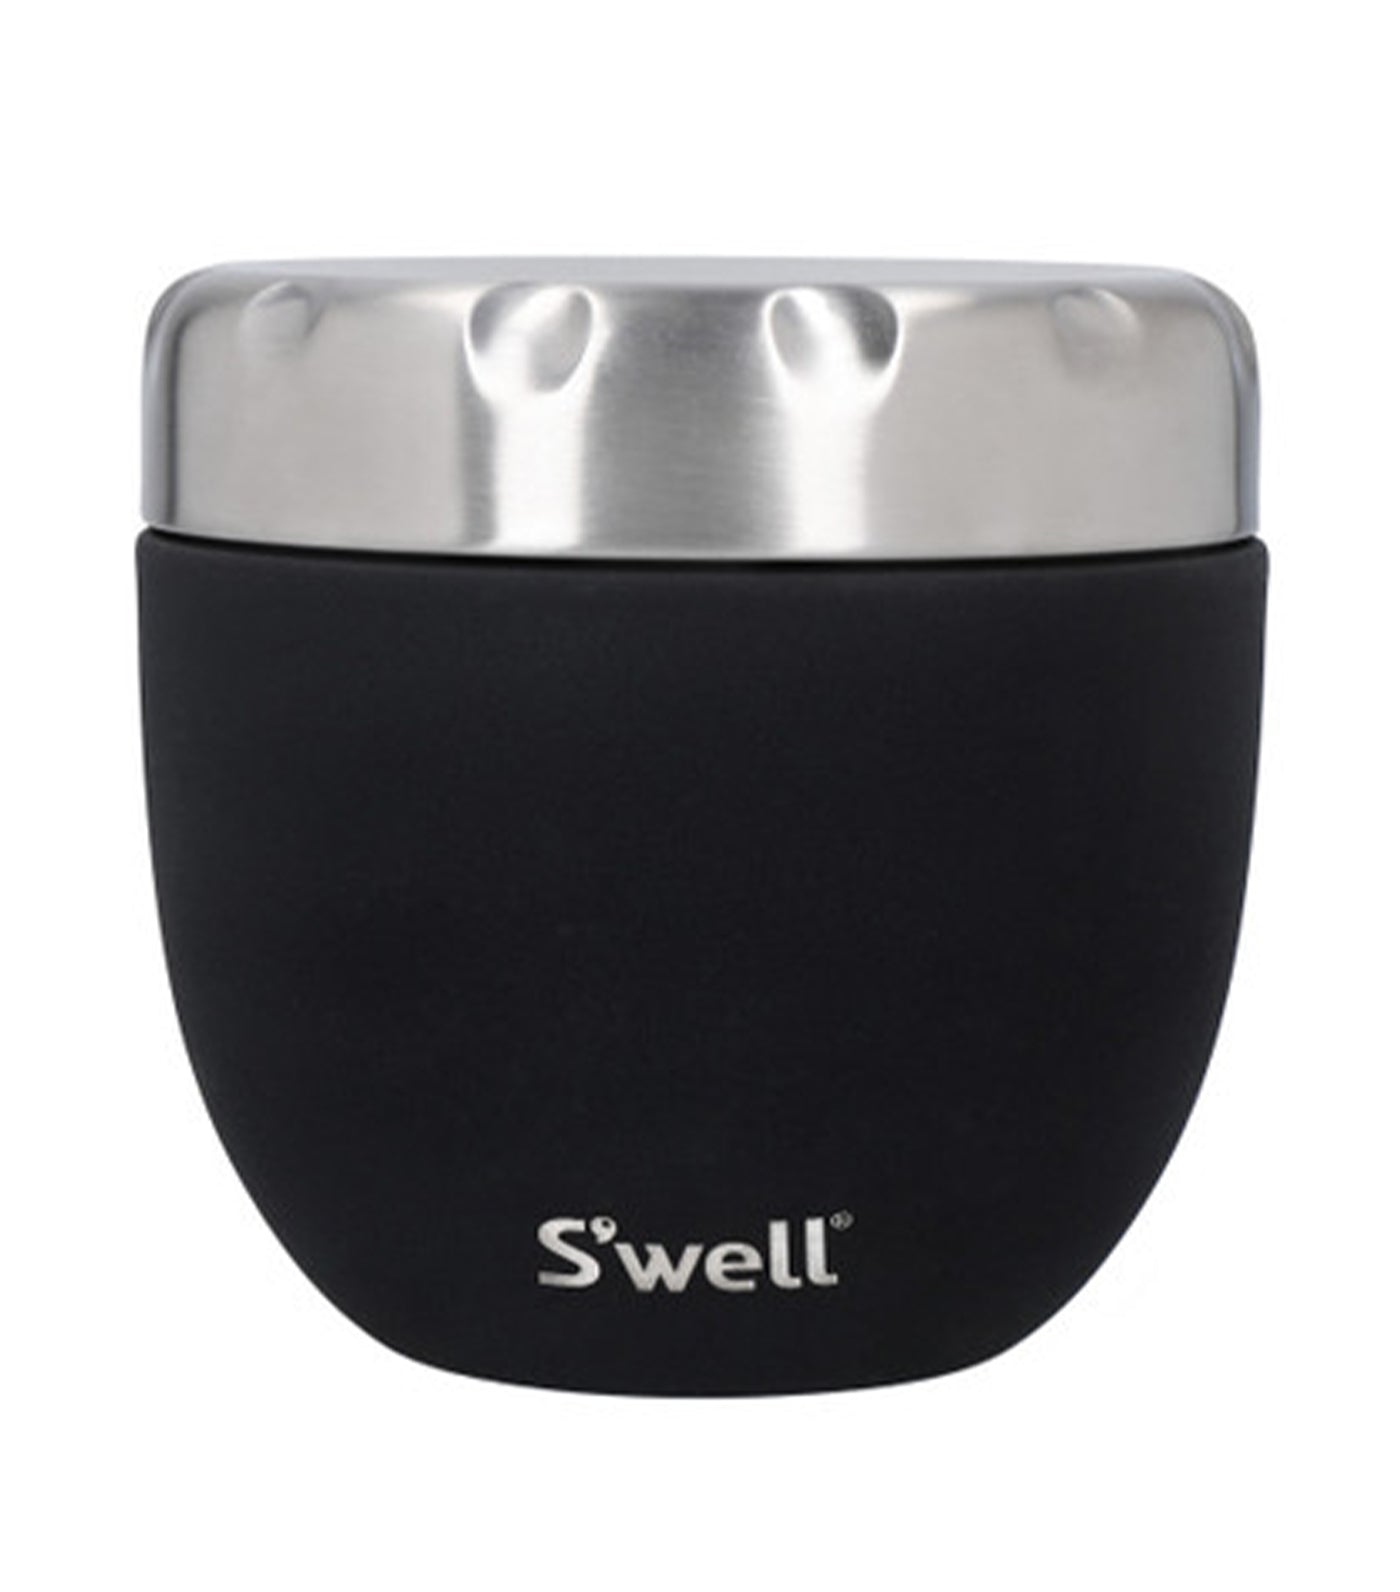 Buy S'well Rose/White Travel Salad Bowl Kit 1.9L from the Next UK